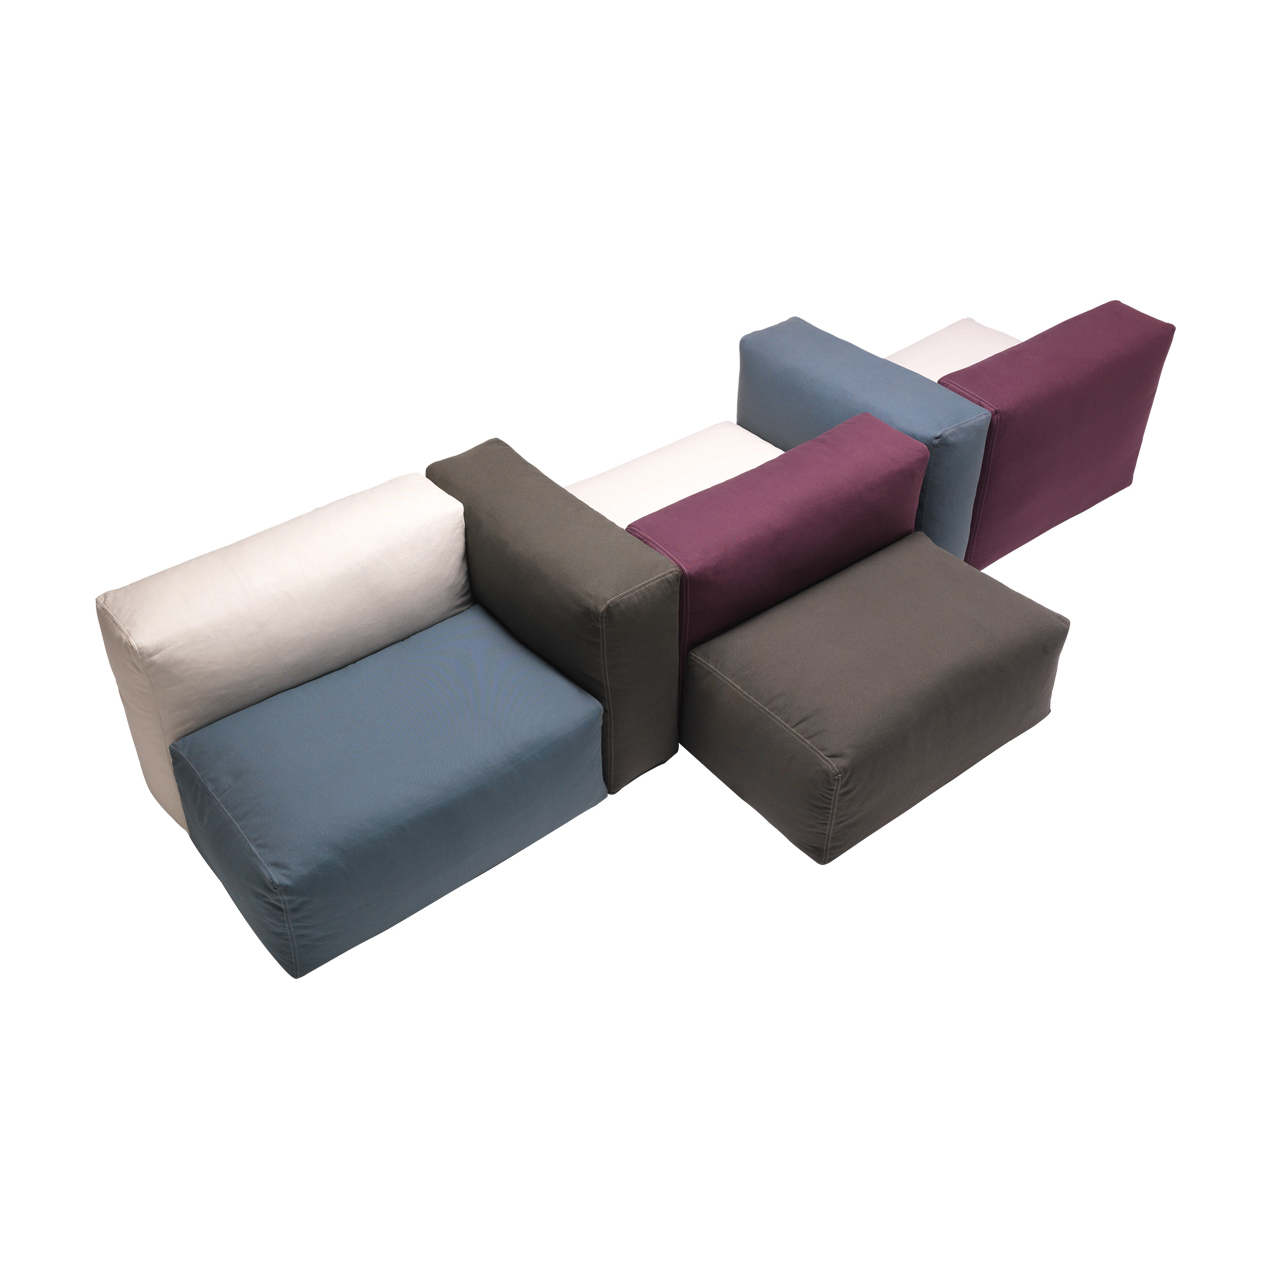 Product Image oblong sofa system